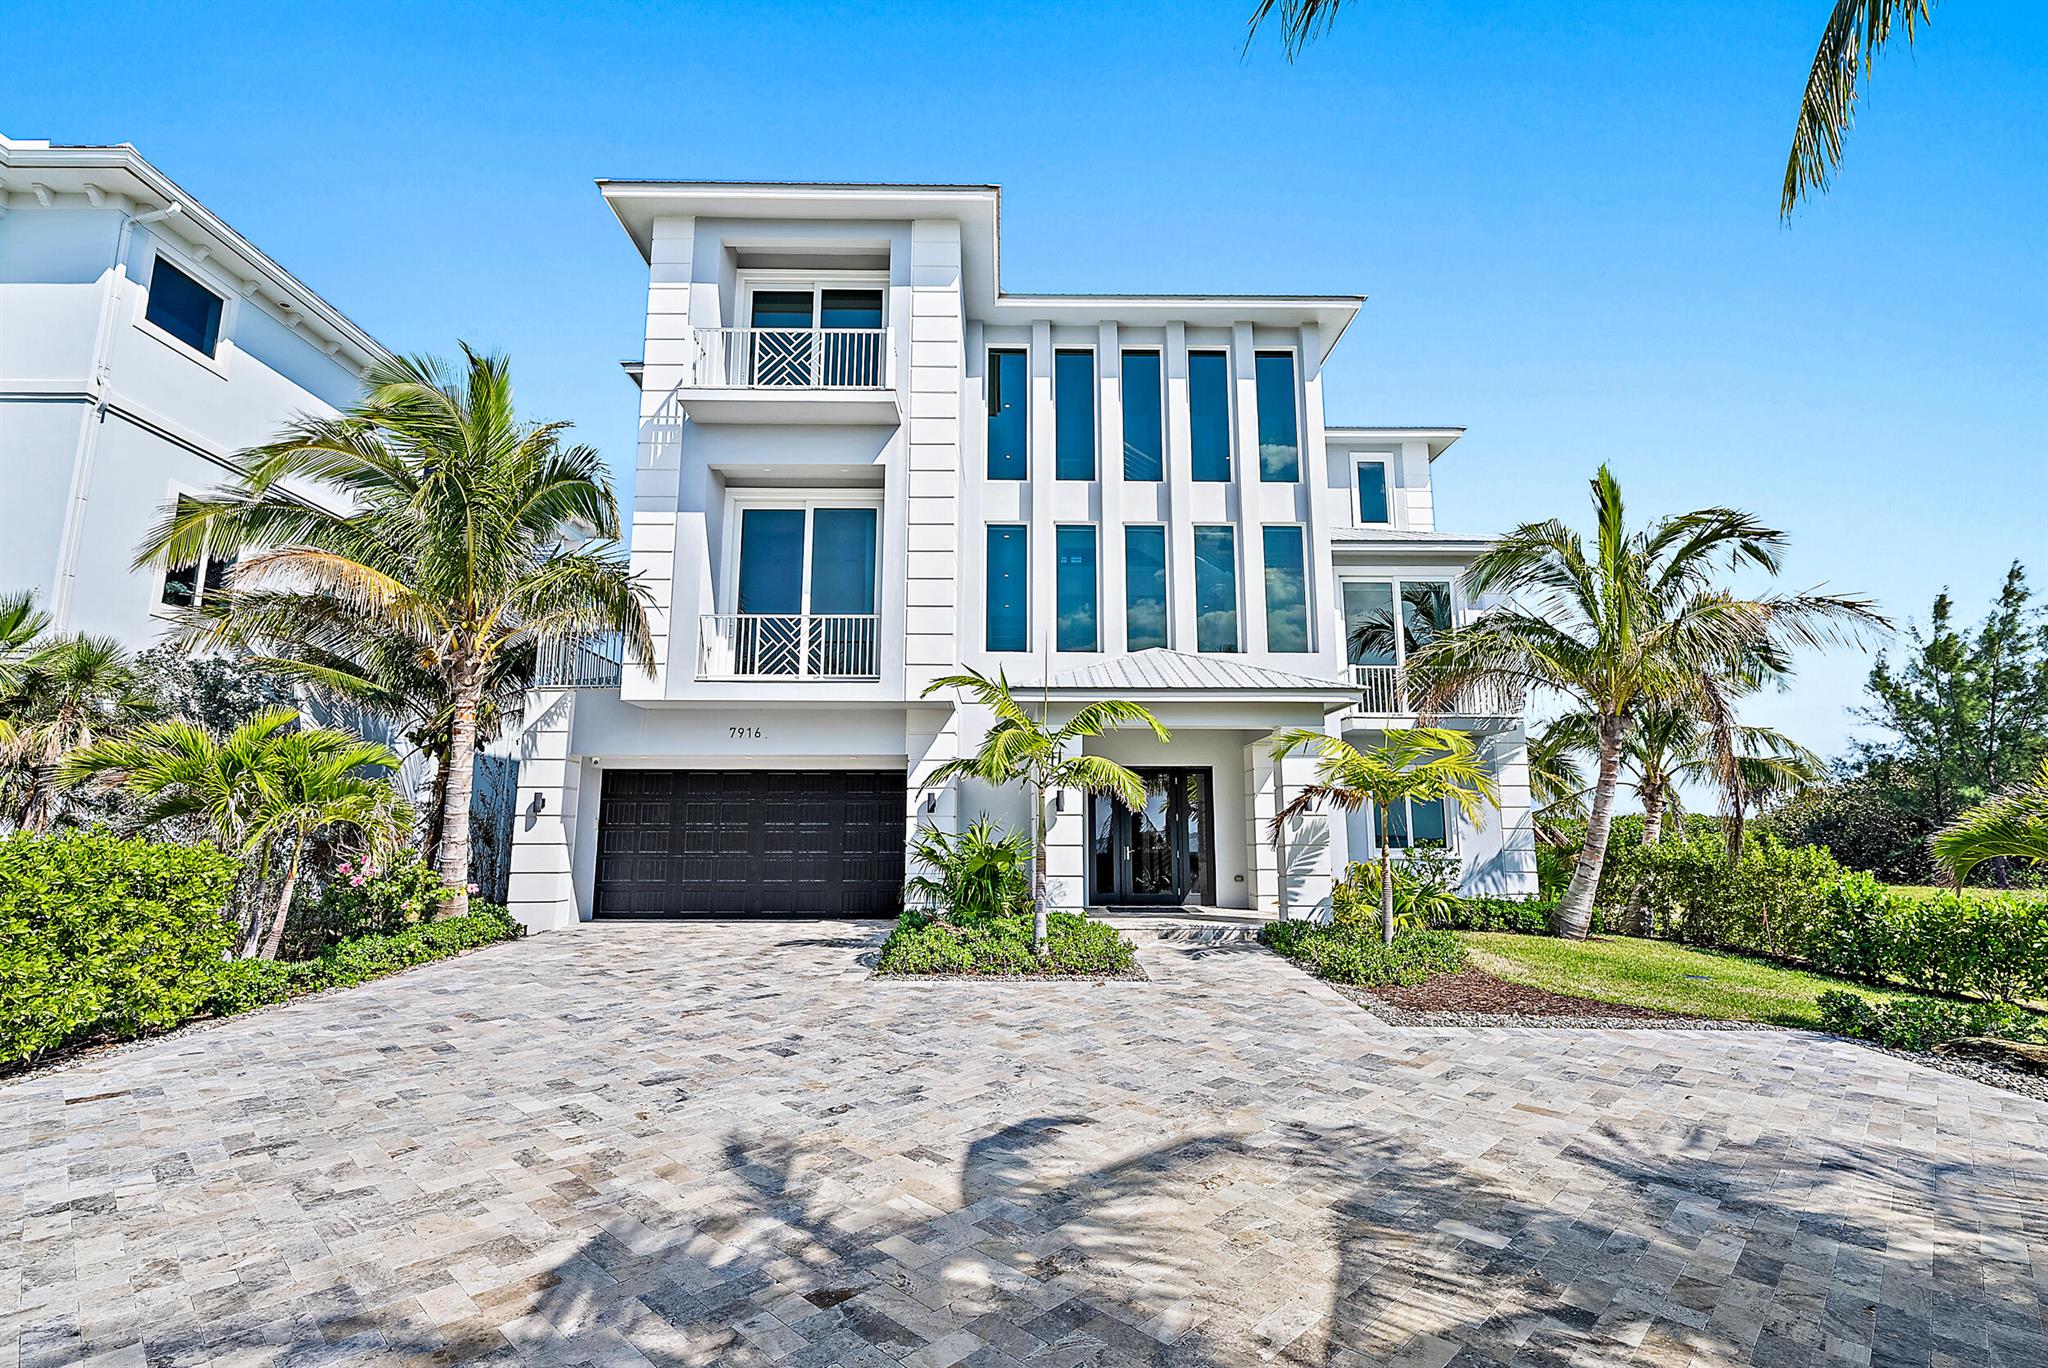 If you are looking for the absolute perfect beach house THIS IS IT! One of the biggest homes in Diamond Sands, a gated community of only 45 homes. This new construction home was custom built by the owner to the highest standards that can only be seen in person. One of two locations in South Florida that has direct oceanfront and intracoastal/bay views with absolutely no obstructions on the bay side. This three story home truly features it all, no expense has been spared in designing this estate. Upon entering the main floor you will be greeted by two rooms capable of becoming a game room, theater, gym, child's play area, or living quarters. views. On this main (second floor) level you will also find the kitchen with high end subzero and Wolf appliances with ample storage and cooking space. Off the back side of the kitchen you will find a large pantry and main level laundry room with dog wash and walk out balcony with direct bay views, don't feel like doing laundry? You will in this laundry room. Going back through the kitchen you will find the dining room with direct oceanfront views for those Sunday or Holiday dinners and cabana bath with shower and a walkout onto the pool deck. The pool area is one that will allow you to feel like you never have to leave the house. A full spa and infinity edge pool overlooking the ocean and expansive deck to accompany all the seating imaginable. Staying in for the night? We have you covered with a double Fire Magic grill where you can grill burgers and steaks while enjoying the stars on the open ocean. Walking back indoors you will find the incredible great room which flows into the the TV room that features a beautiful bar and full length window showcasing the incredible bay views. The TV room features a slider that walks out to the deck and spa. Also found on this main level is a guest bedroom with attached full bathroom. Elevator access can be found on all three levels. The main level also features an office/extra bedroom with extraordinary views of the bay and private balcony. Walking up to the third level will give you a full view of the bay from the stairs to stairwell landing. On the third level you will find a bay view guest bedroom with full bath that, you guessed it, also has bay views. The third floor is where you will find the bedrooms and TV sitting area. The master wing is a masterpiece where you will wake up and see the most beautiful sunrise every morning. Enjoy a cup of coffee on the master balcony and enjoy the beautiful ocean breeze. The master wing also features an oversized bathroom with his and her vanities and center shower with ocean view. There is a 400 sq. ft attached room in the master wing that could become a master closet or a combination of closet and child's room. Splitting the master bedroom wing and guest suite is a TV/sitting room featuring a coffee or nightcap bar and walk out balcony with expansive ocean and bay views. On the other side of the center sitting room is a guest suite fit for a king and queen featuring a big walkout balcony with direct ocean views. Walking back through the guest suite you will find a beautiful bathroom that has endless bay views especially while enjoying a relaxing soak in the freestanding tub. Exiting the guest suite you will also find a third floor laundry room next to the elevator so walking up and down stairs is a thing of the past. A full 5-6 car garage that doe shave AC and features a big storage area at the end of the garage for extra storage or a workshop. There is no where else in South Florida that you can find direct oceanfront views for an amazing sunrise and direct intracoastal/bay view for those perfect sunsets at these price points. If you are looking for a recently completed custom oceanfront home that still has some blank space for a theater, game room, play room, live in quarters, and the ability to complete the outdoor entertaining space with a fireplace and wet bar then this is your home. There truly is none other like it in Diamond Sands. Low HOA fees that include a virtual guard gate and landscaping for the ultimate beach house retreat. This home is ready for any buyer looking to find a great deal in South Florida with direct ocean front.